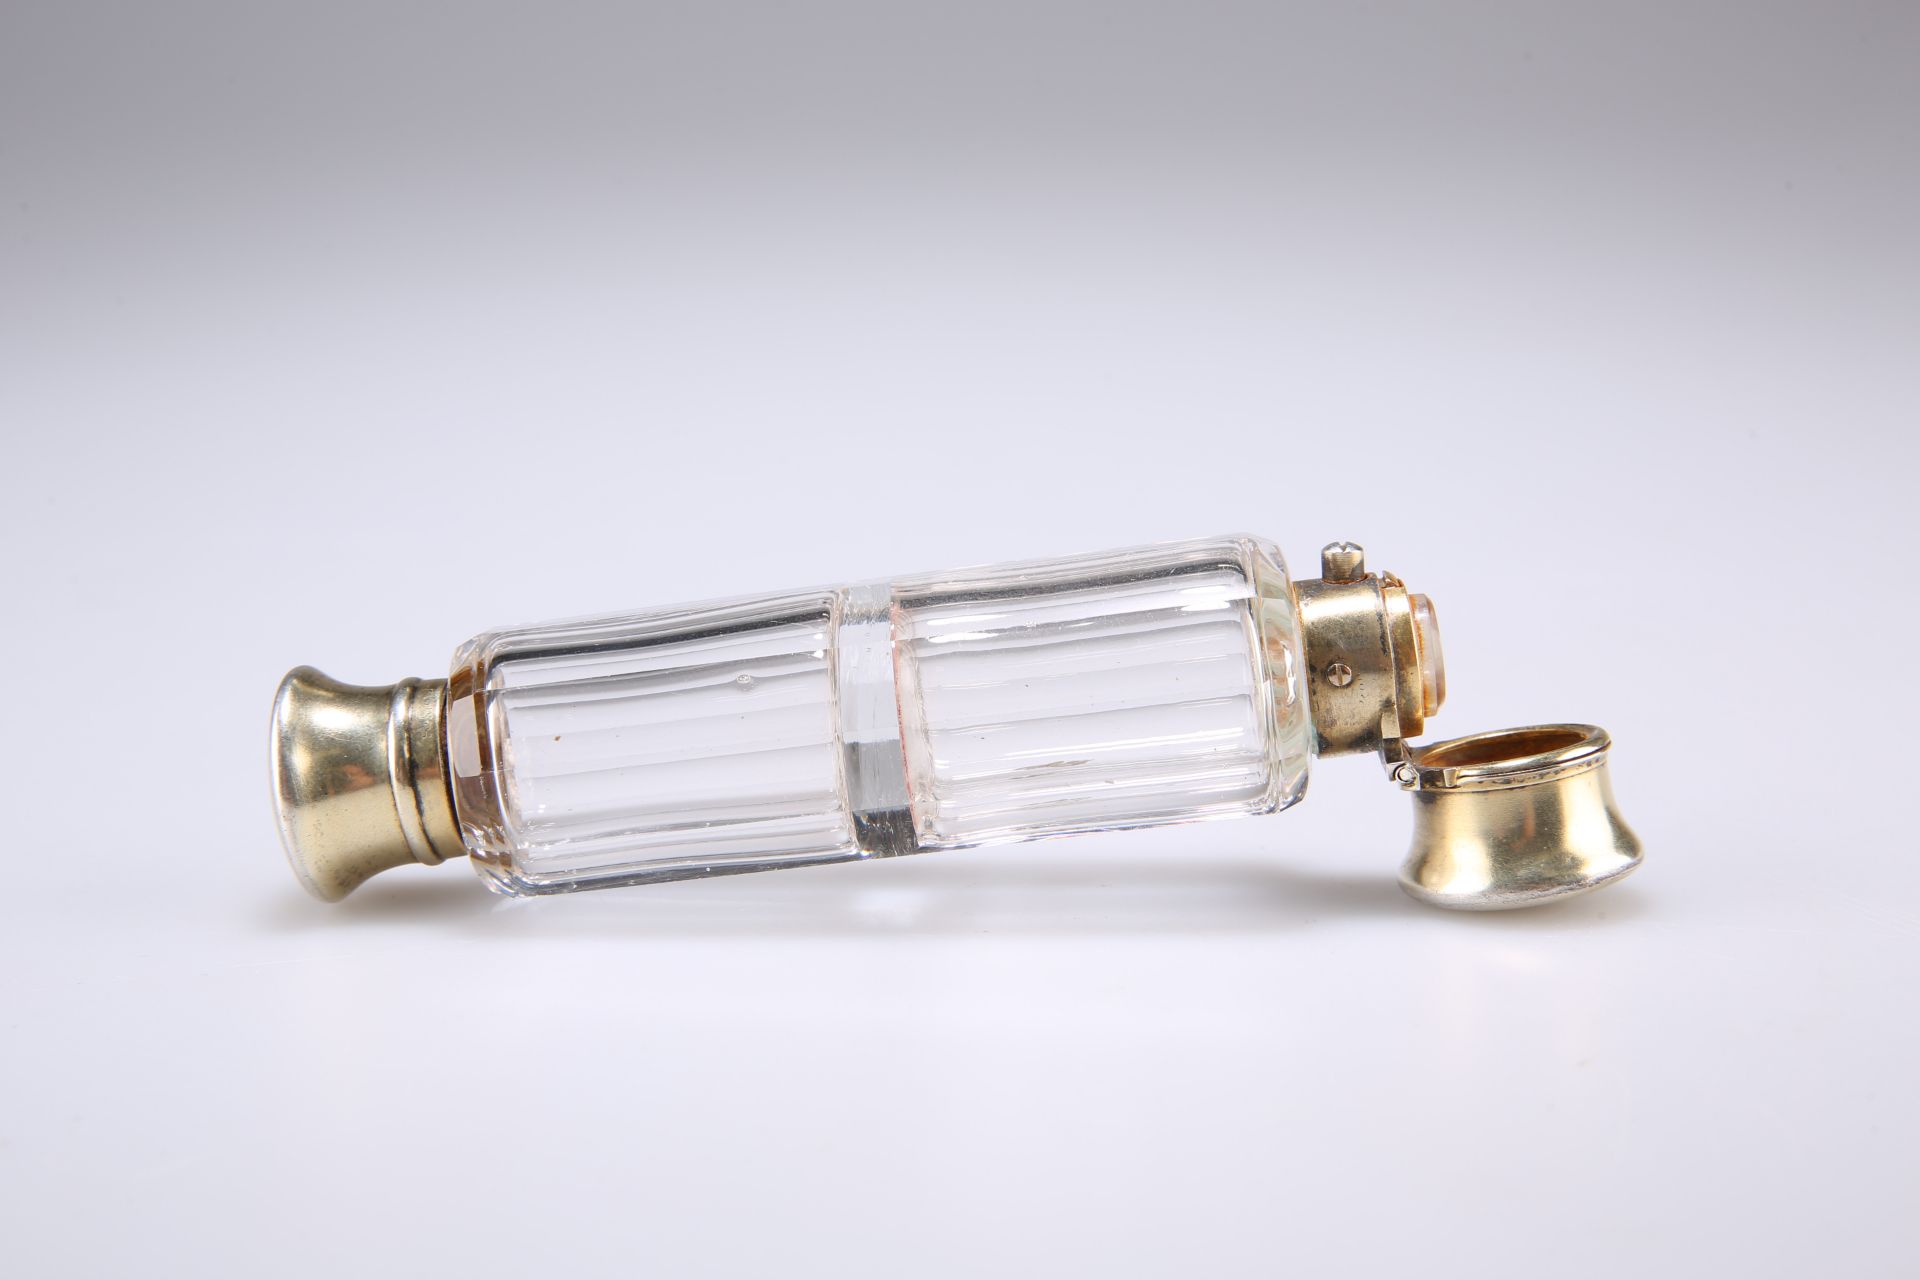 A LATE VICTORIAN DOUBLE-ENDED GLASS SCENT BOTTLE, by S. Mordan & Co, the faceted glass body with